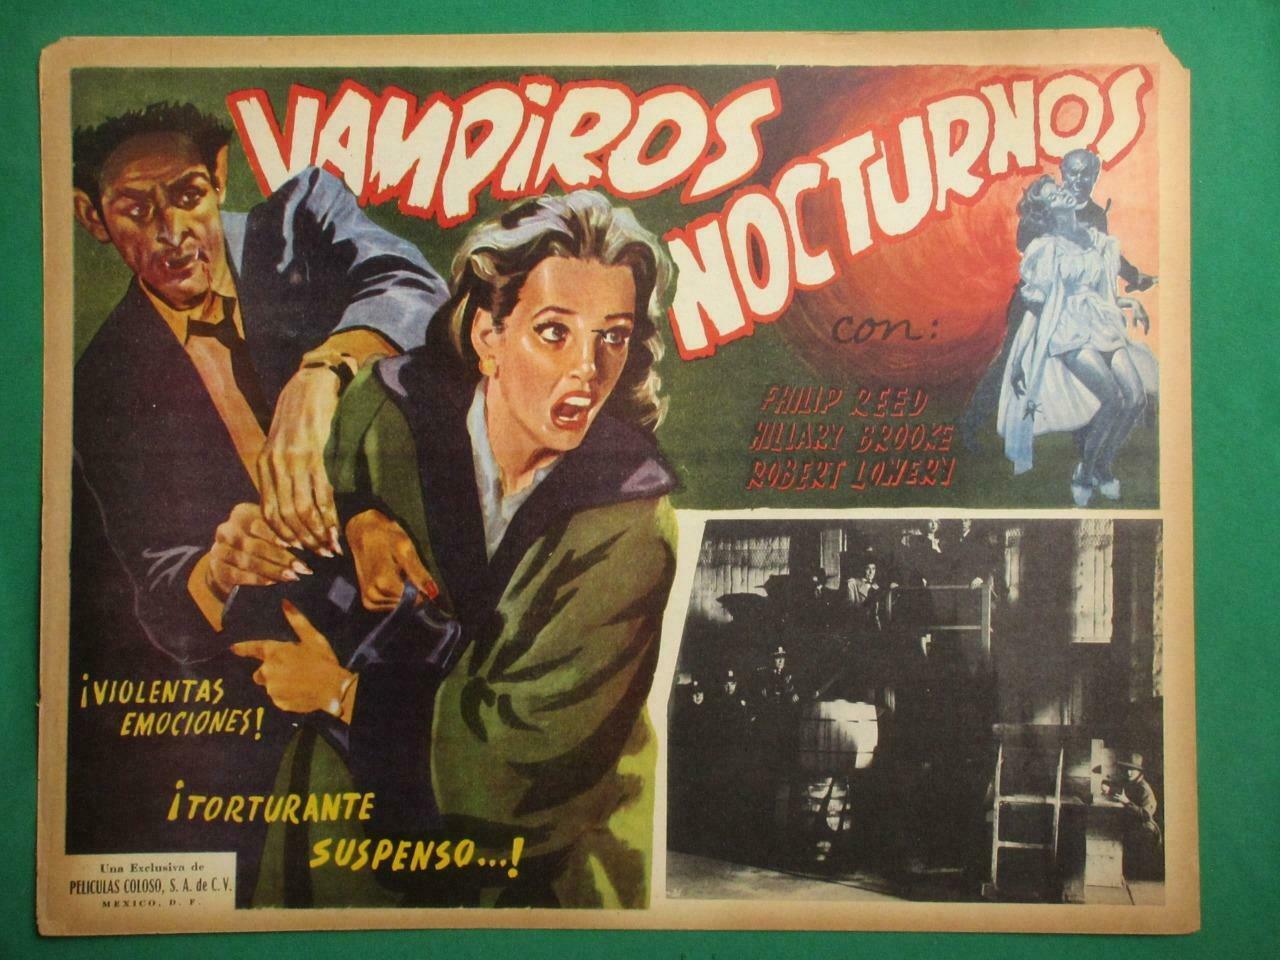 Robert Lowery Vampiros Nocturnos Woman Scared Amazing Art Mexican Lobby Card 8